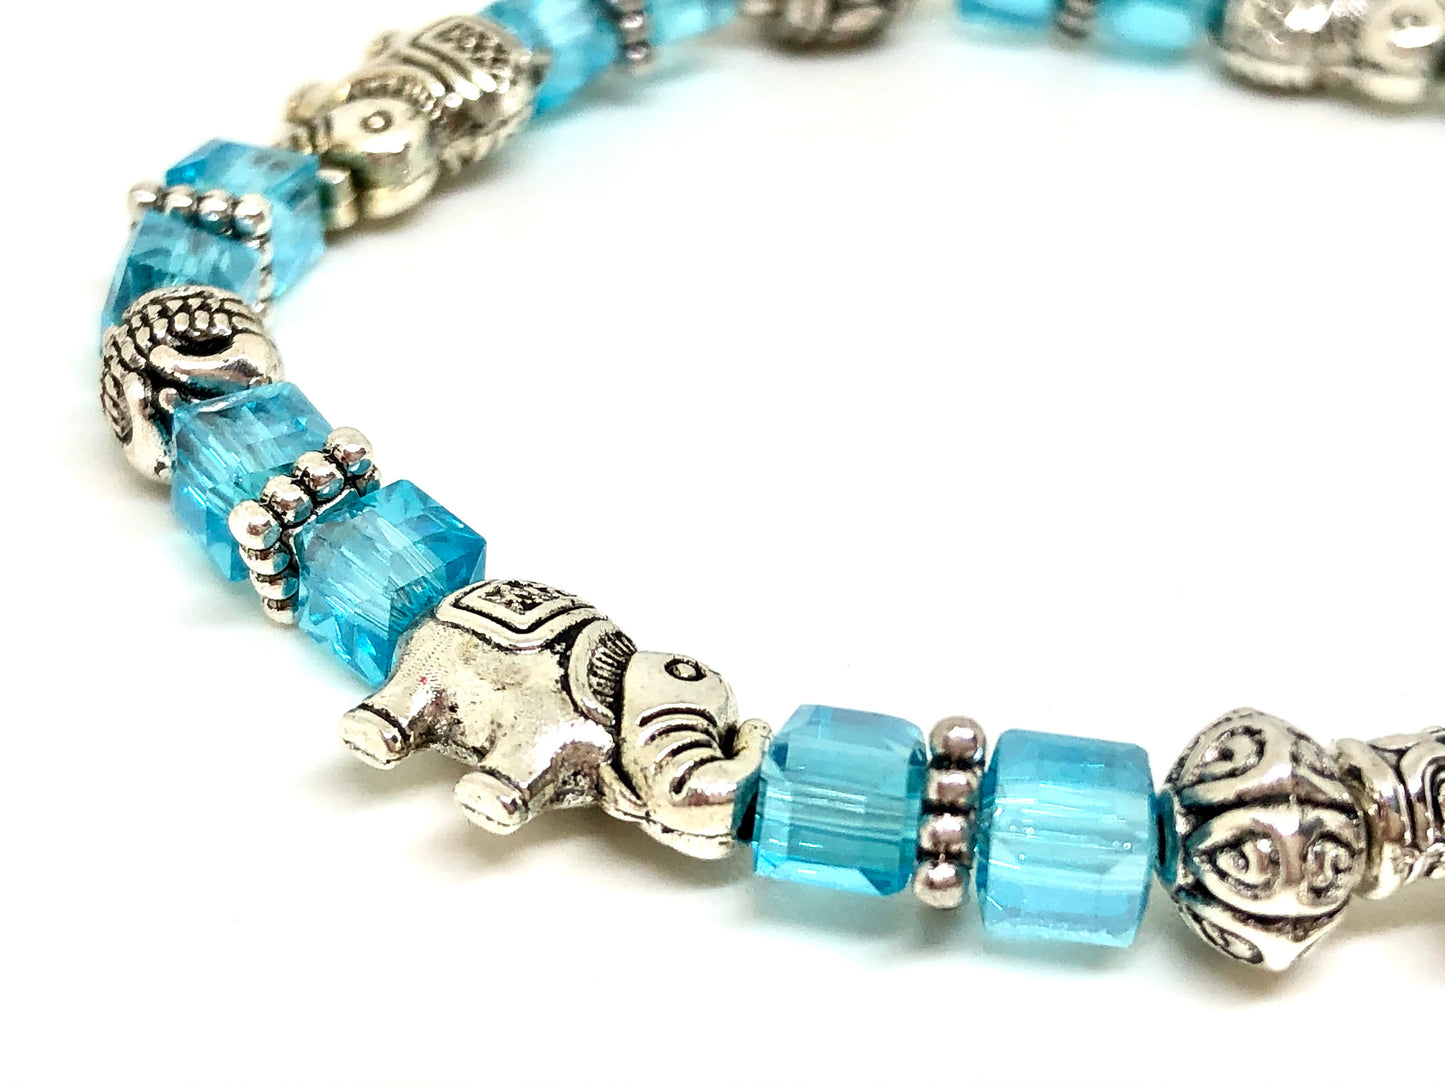 Elephant Stretch Bracelet - Crystal Bead Bracelet 13 Colors - CRYSTAL BABY BLUE , Good Luck Strength and Wisdom Symbol - Cheer and Dance On Demand